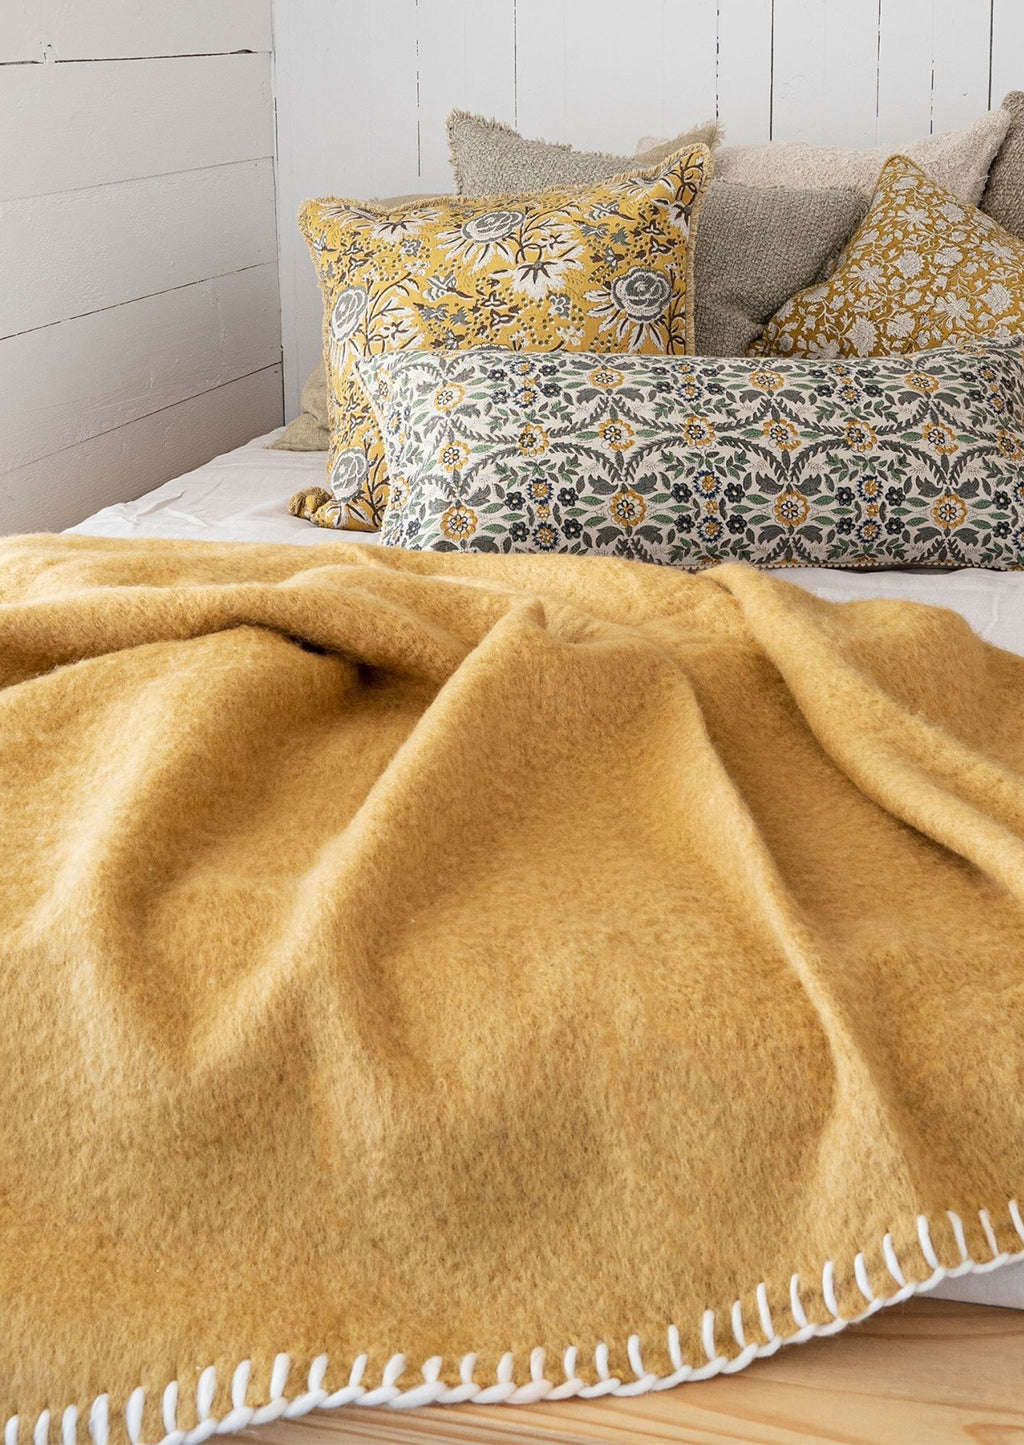 4: A mustard throw on a bed with throw pillows.